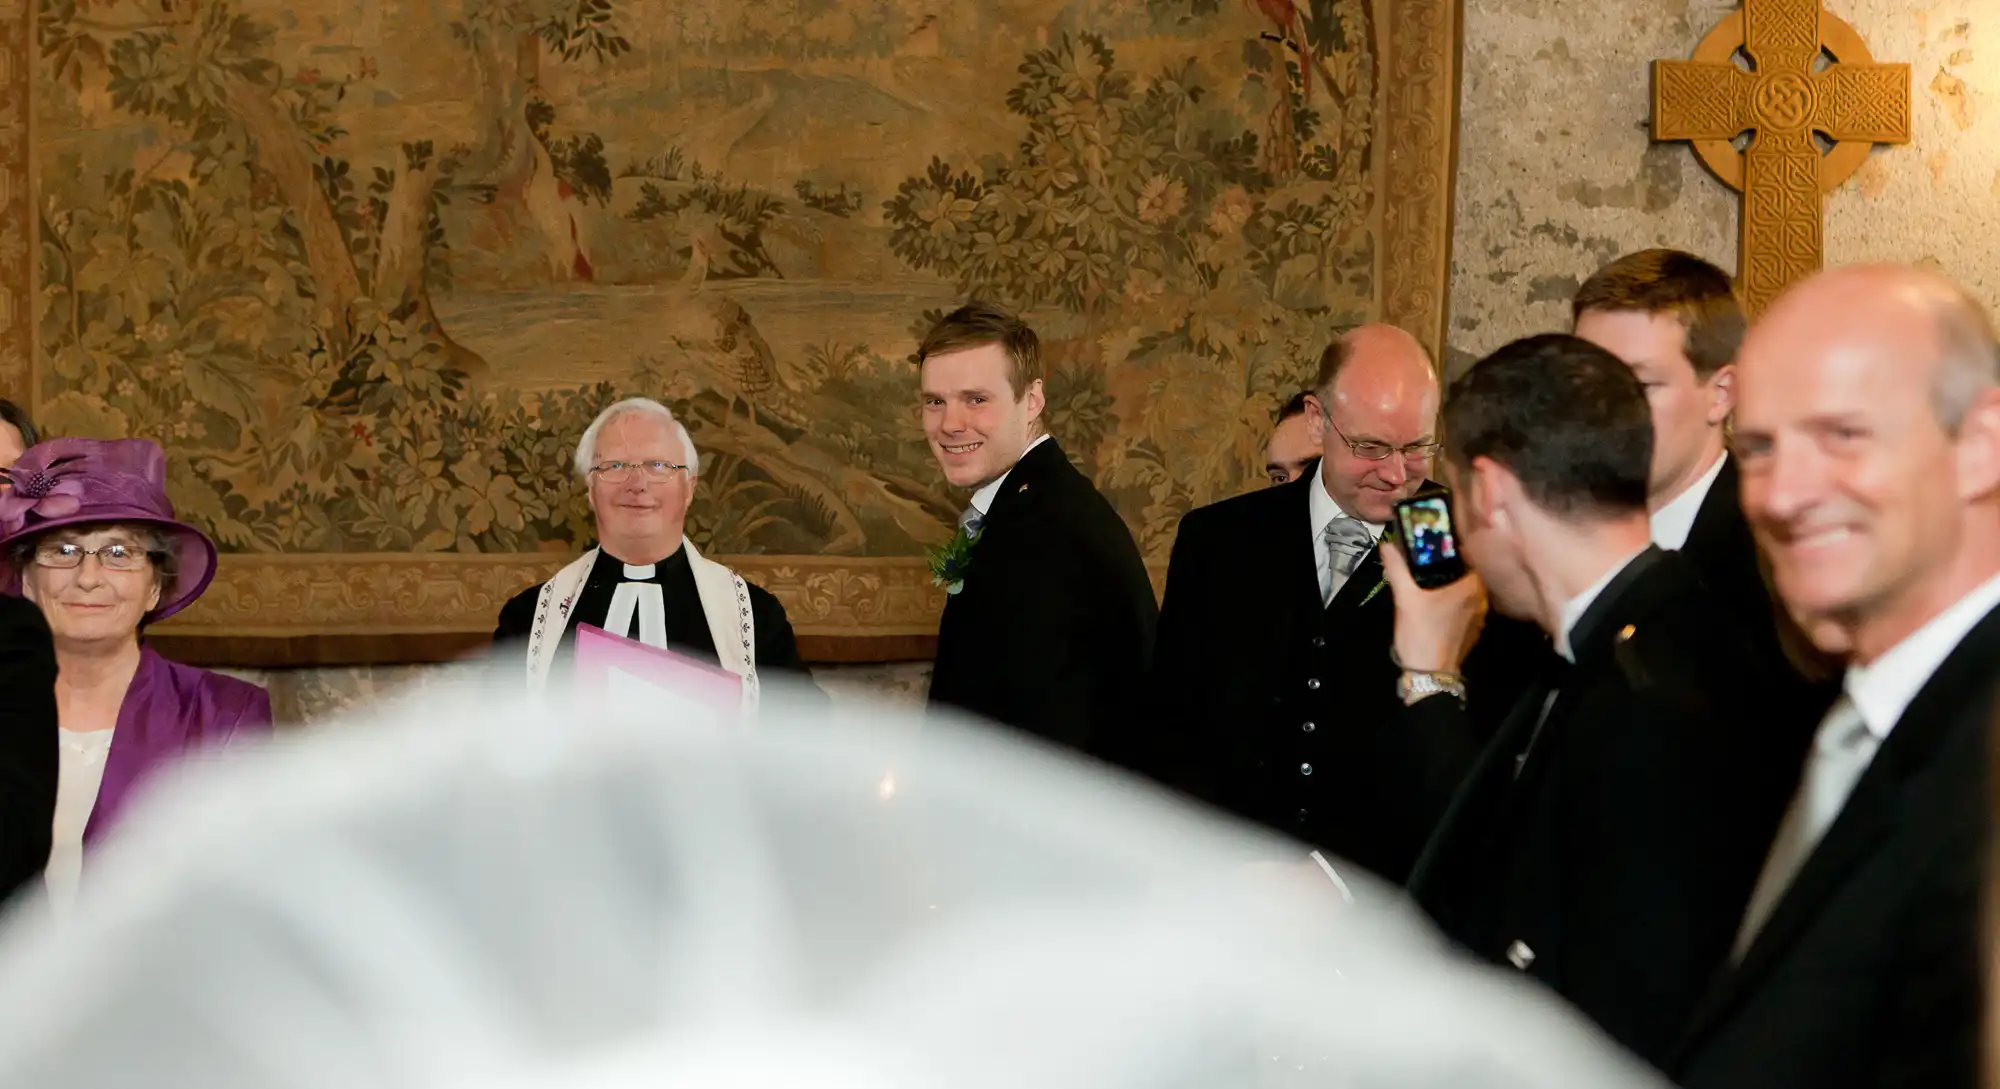 Wedding ceremony in a church with a bride's veil in the foreground and smiling groom looking back, surrounded by guests and a clergyman.